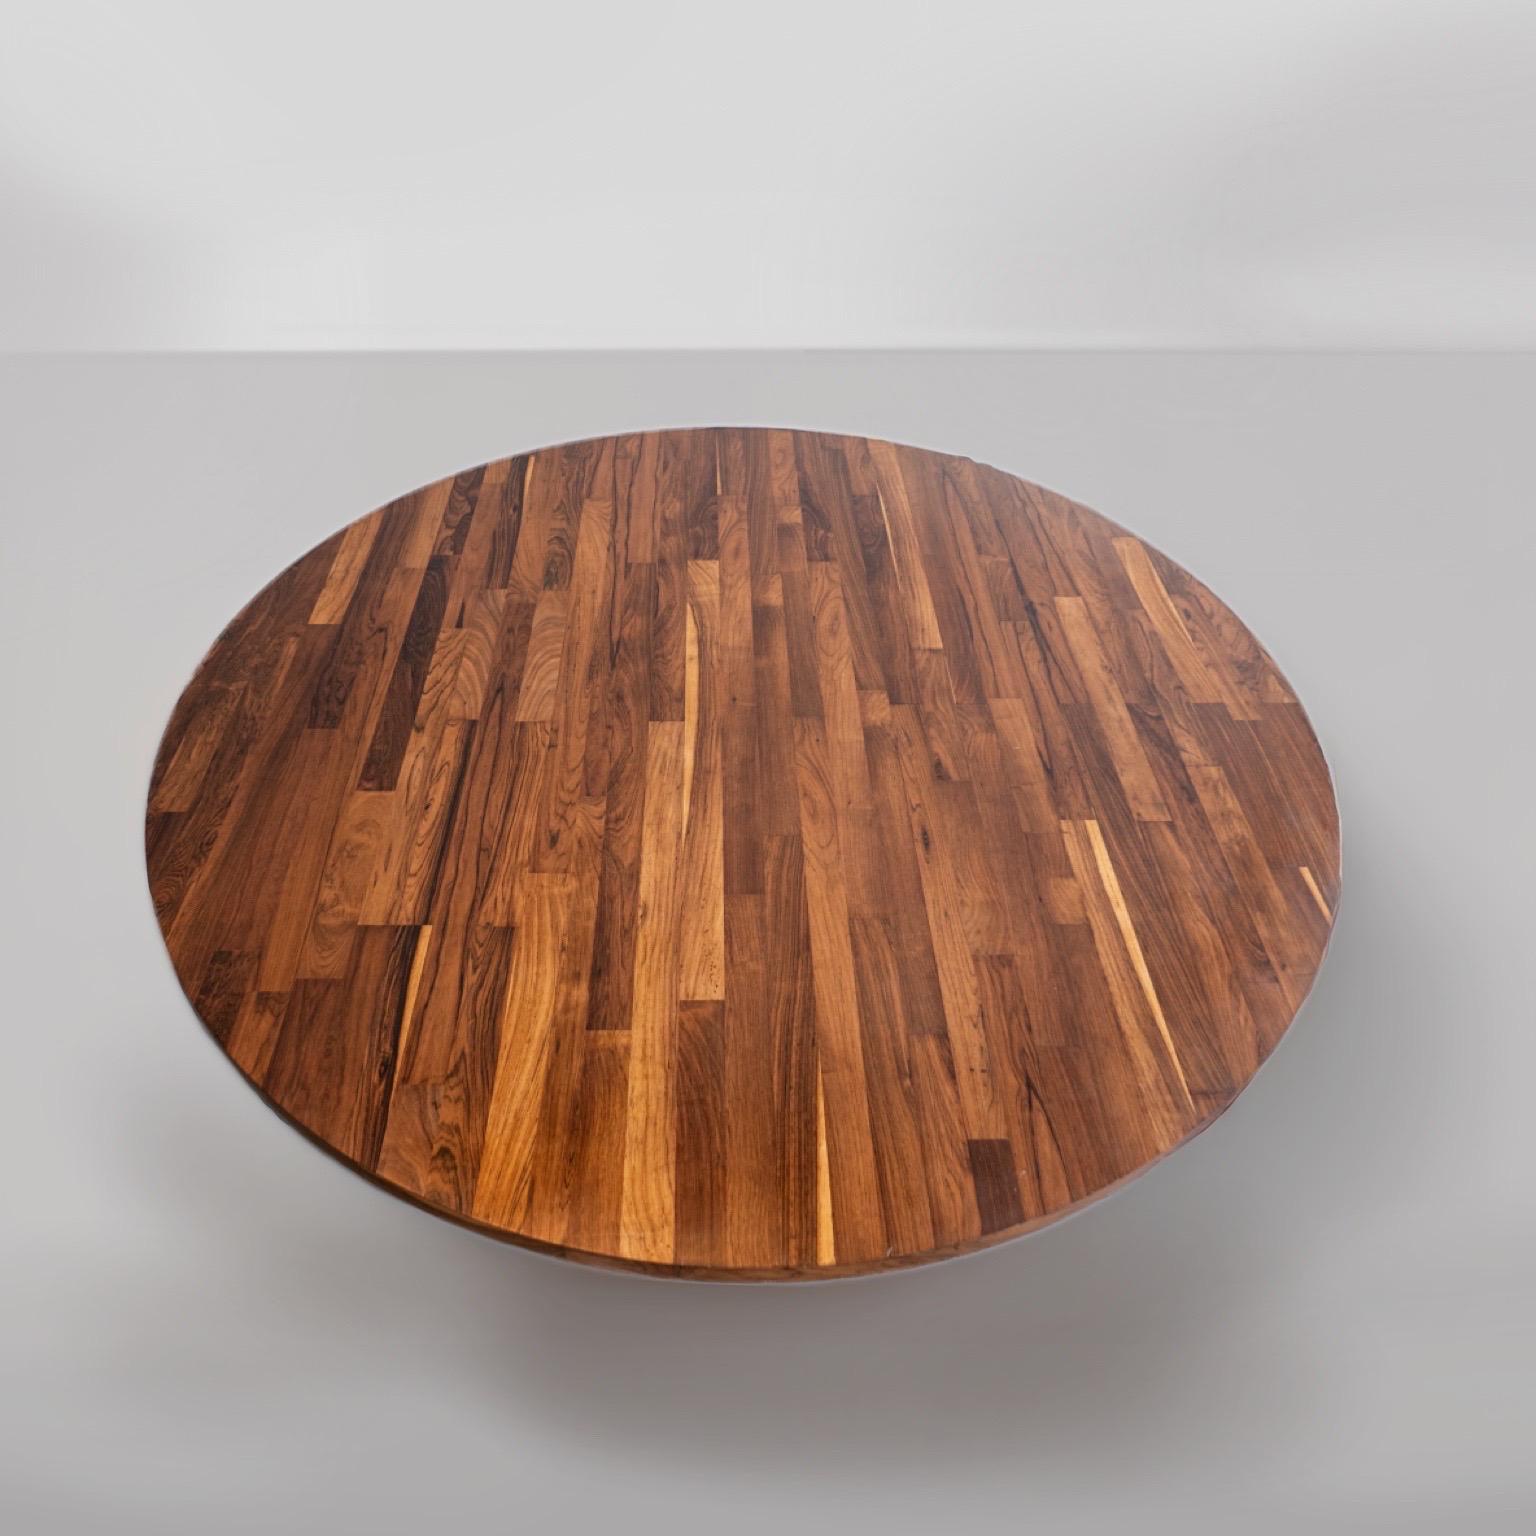 Veneer Mid-Century Modern Round Wooden Leather Dining Table by Jorge Zalszupin, 1960s